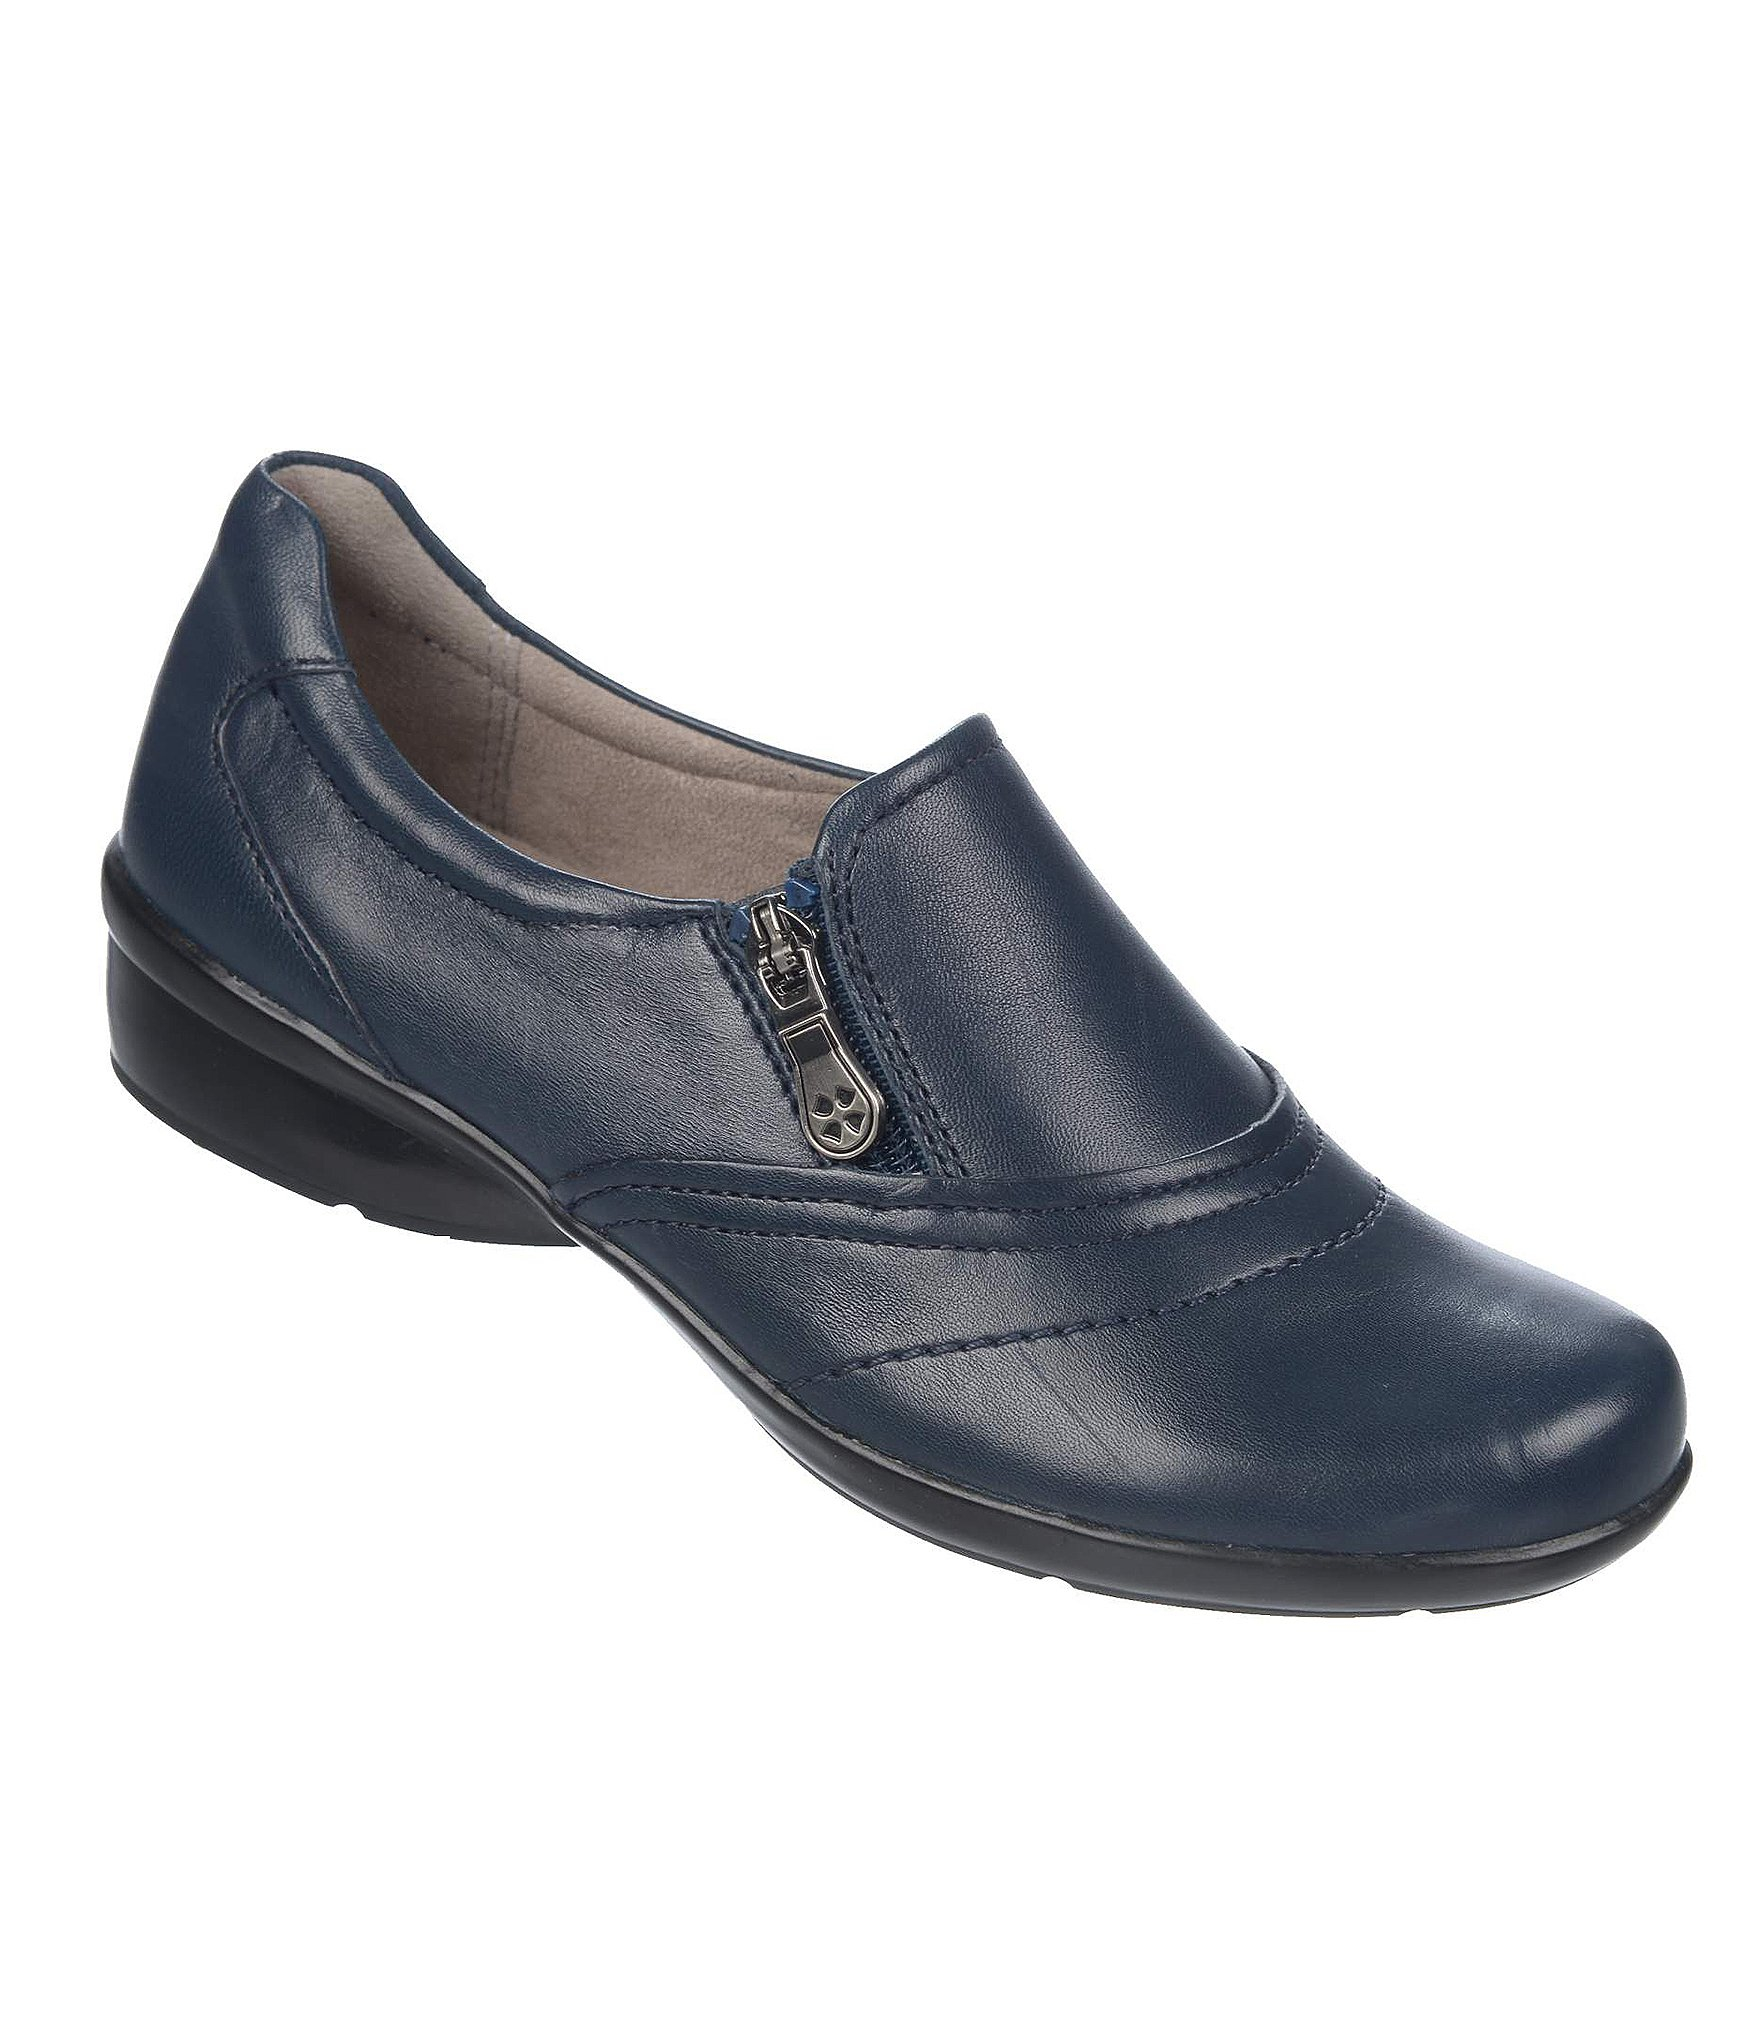 Dillards shoes sale at 70 - 28 images - dillards shoes at 